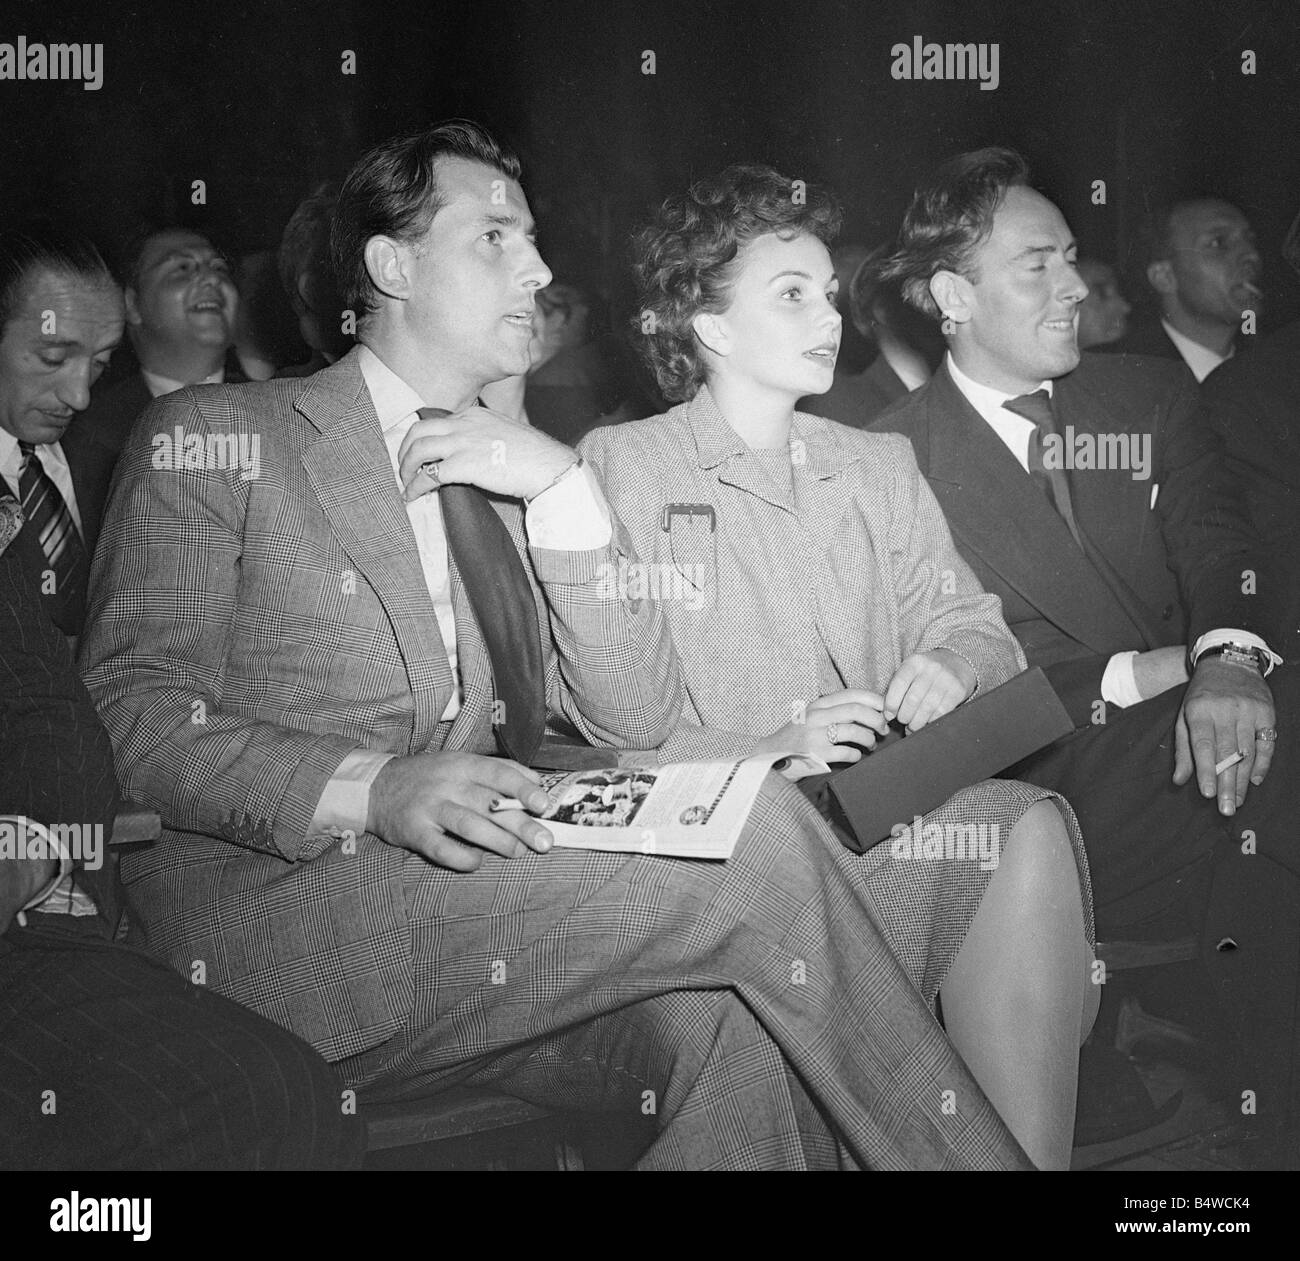 Stewart Granger actor and Jean Simmonds actress seen together at a big ...